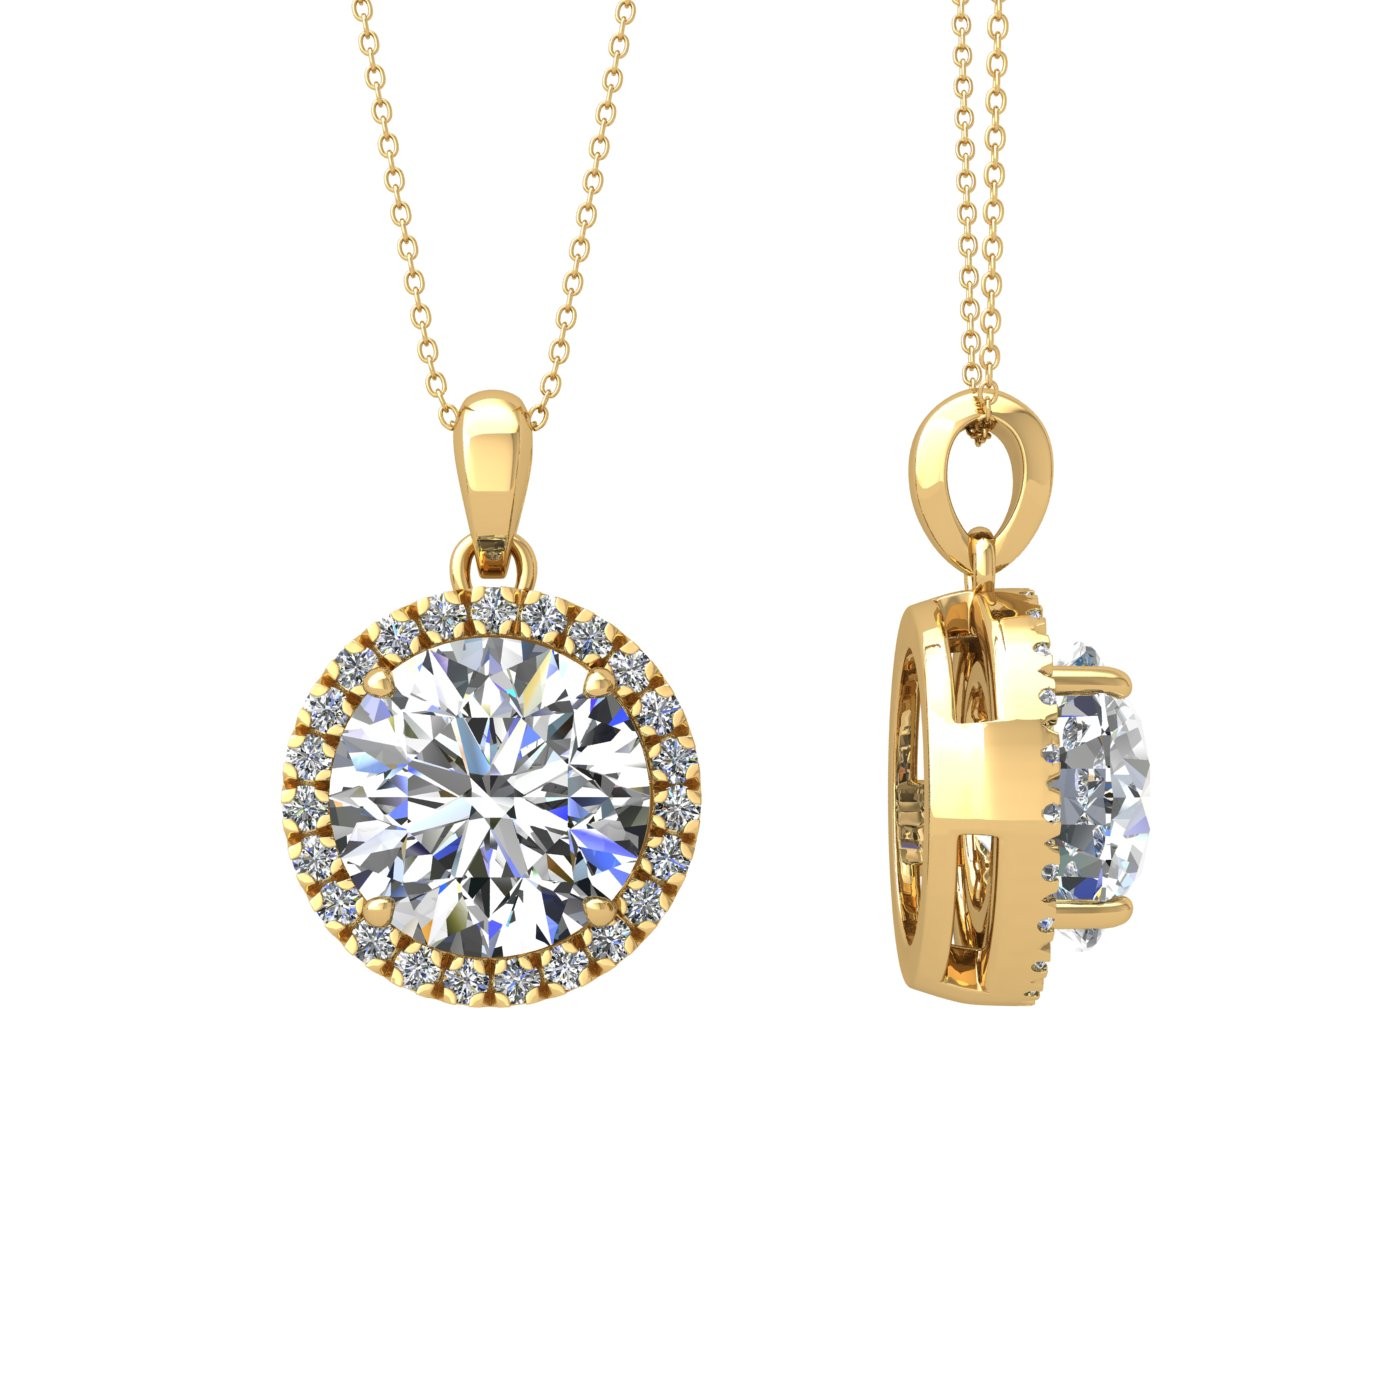 18k yellow gold  1,5 ct 4 prong round shape diamond pendant with diamond pavÉ set halo including chain seperate from the pendant